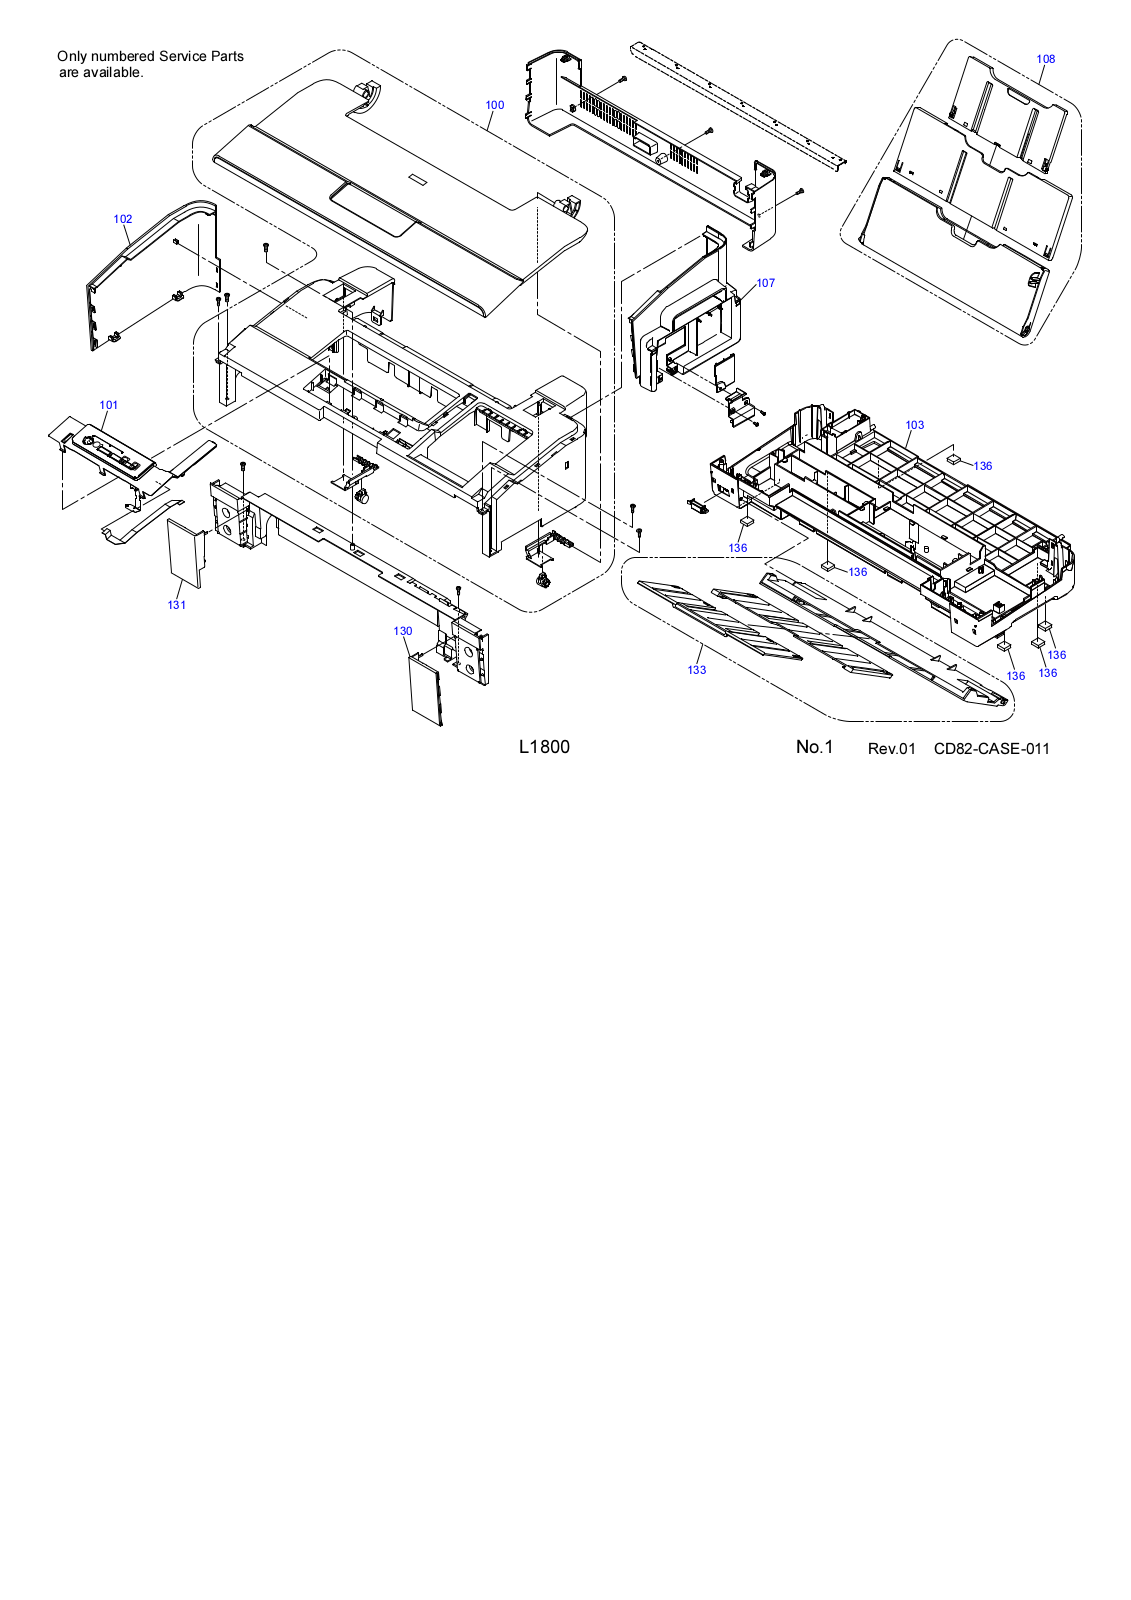 Epson L1800 Exploded Diagrams 1 7567